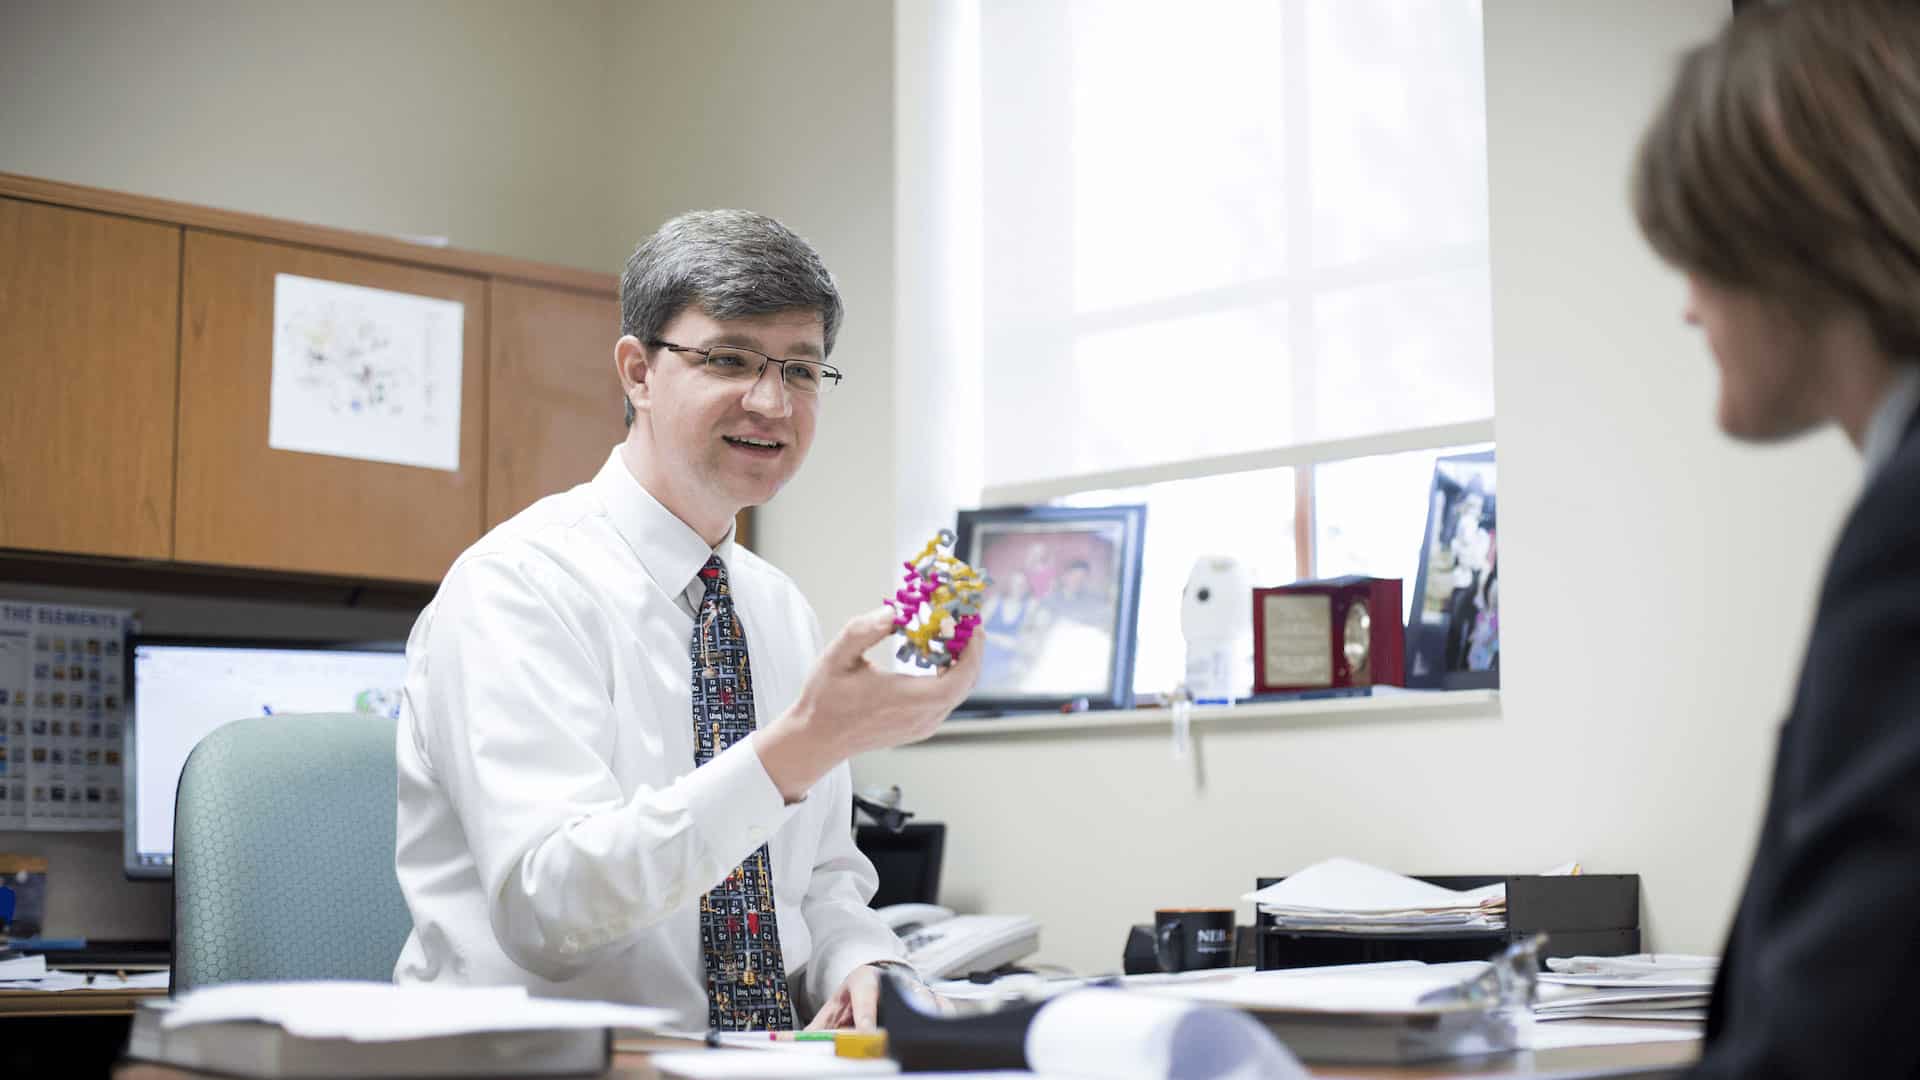 Dr. Hamilton in office hours